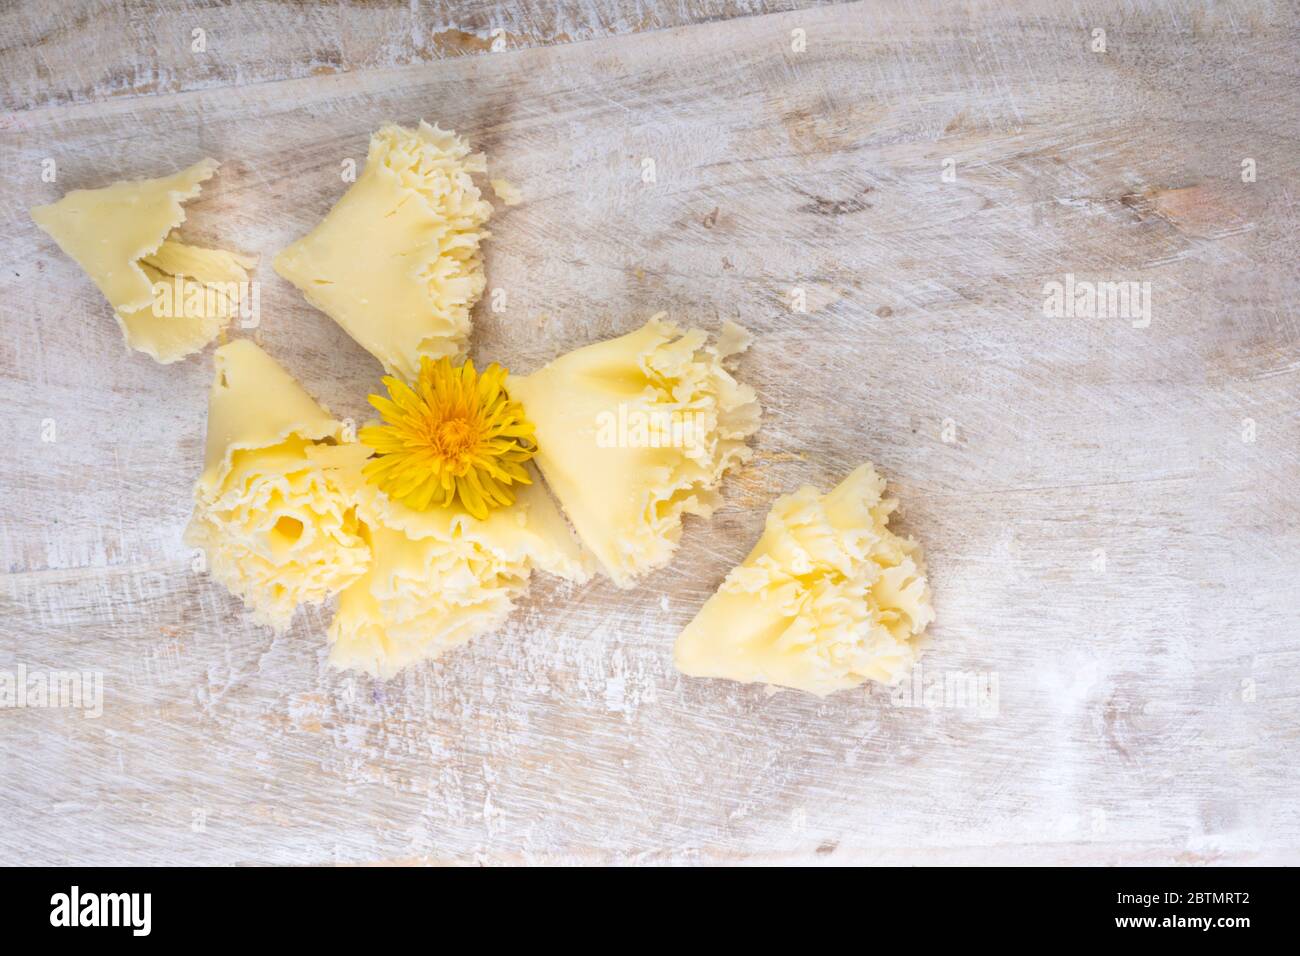 Shaving Tete De Moine Cheese Using Girolle Knife. Variety Of Swiss  Semi-hard Cheese Made From Unpasteurized Cows Milk, The Name Monks Head  Stock Photo, Picture and Royalty Free Image. Image 166728765.